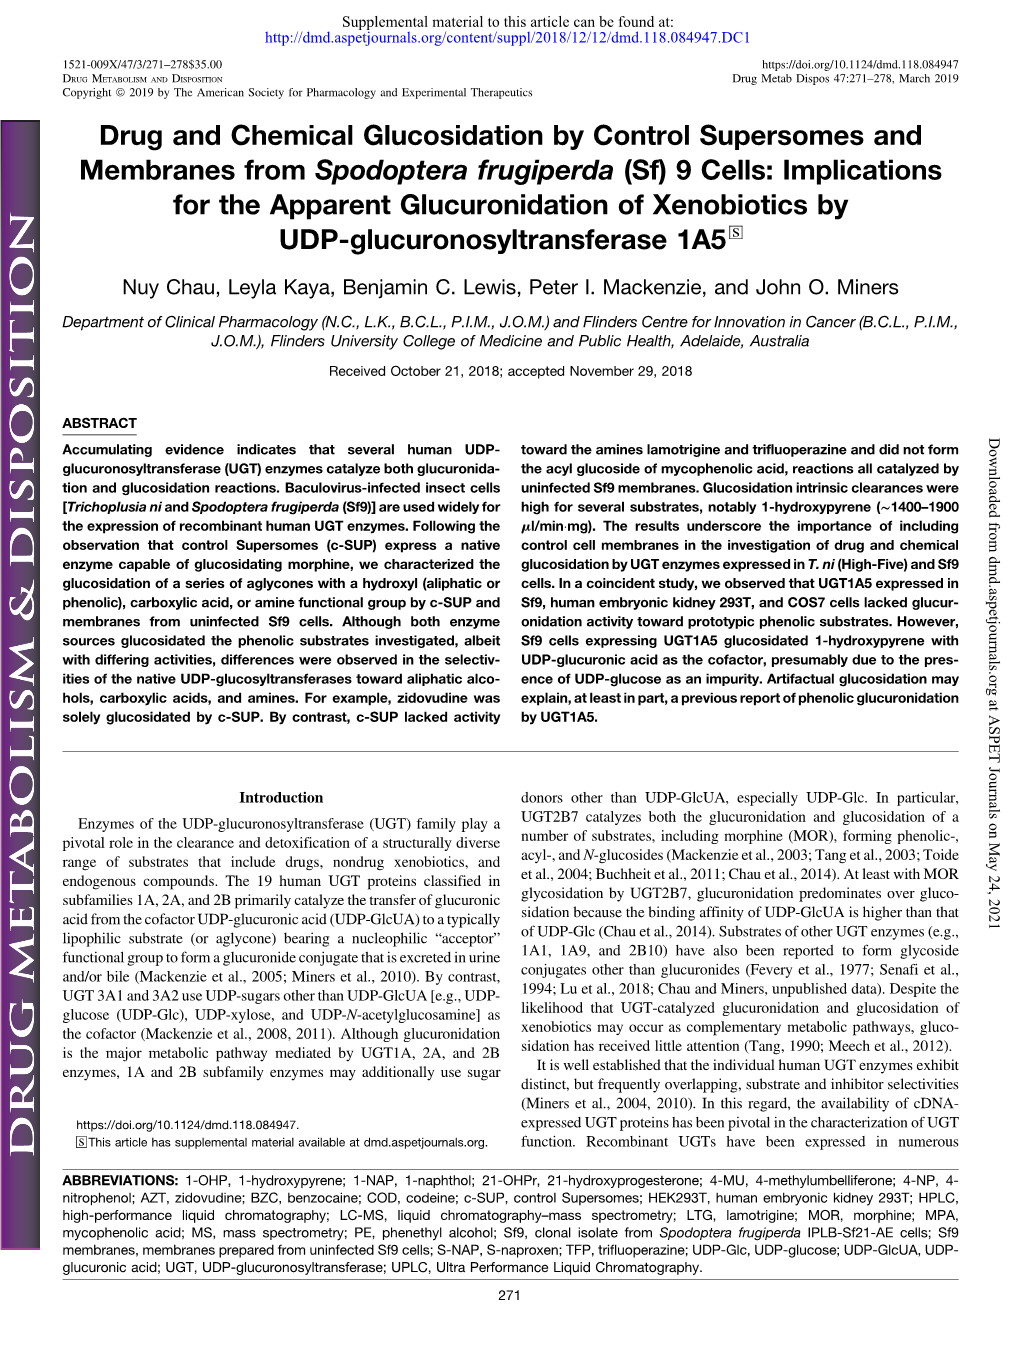 (Sf) 9 Cells: Implications for the Apparent Glucuronidation of Xenobiotics by UDP-Glucuronosyltransferase 1A5 S